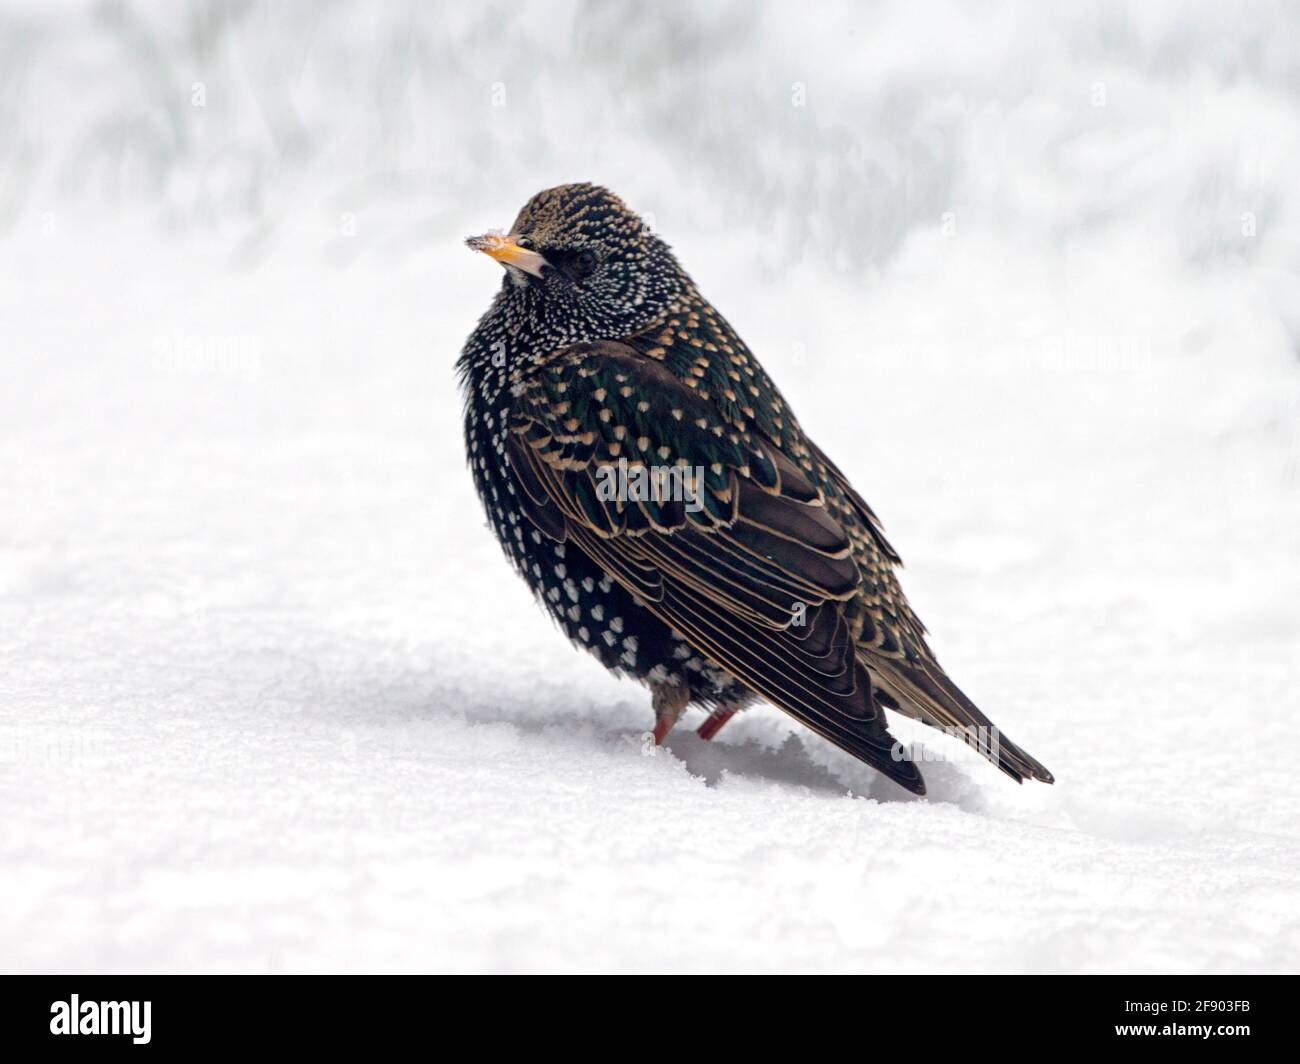 Common starling standing in snow Stock Photo